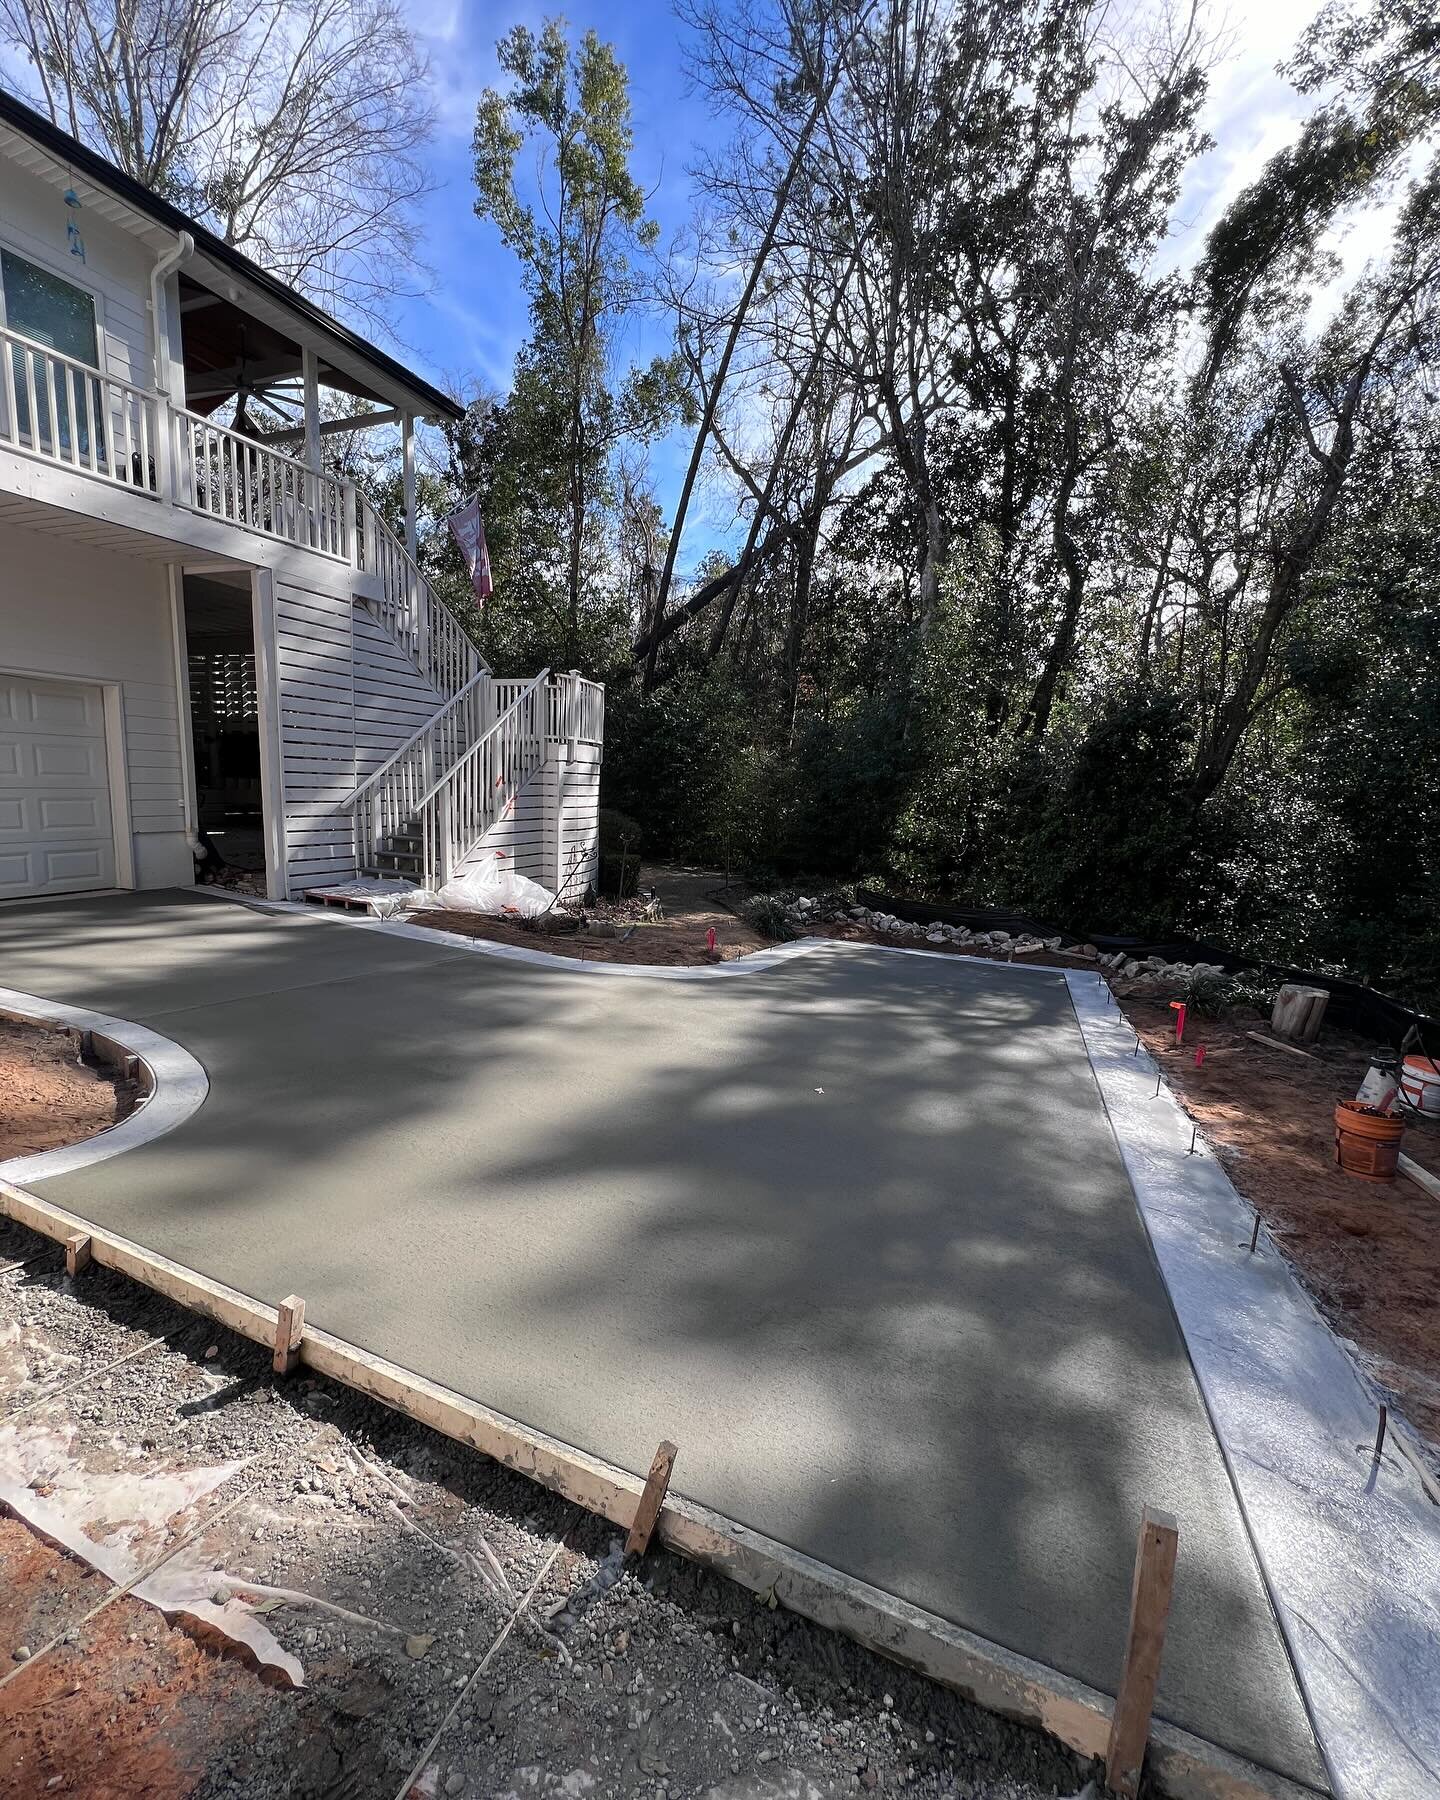 First placement down on this driveway. Long ways to go! This driveway will be a master piece! Tomorrow is a big day for us. We have two large driveways we are placing. Continuance on this one and our first placement on another in Orange Beach with Ju